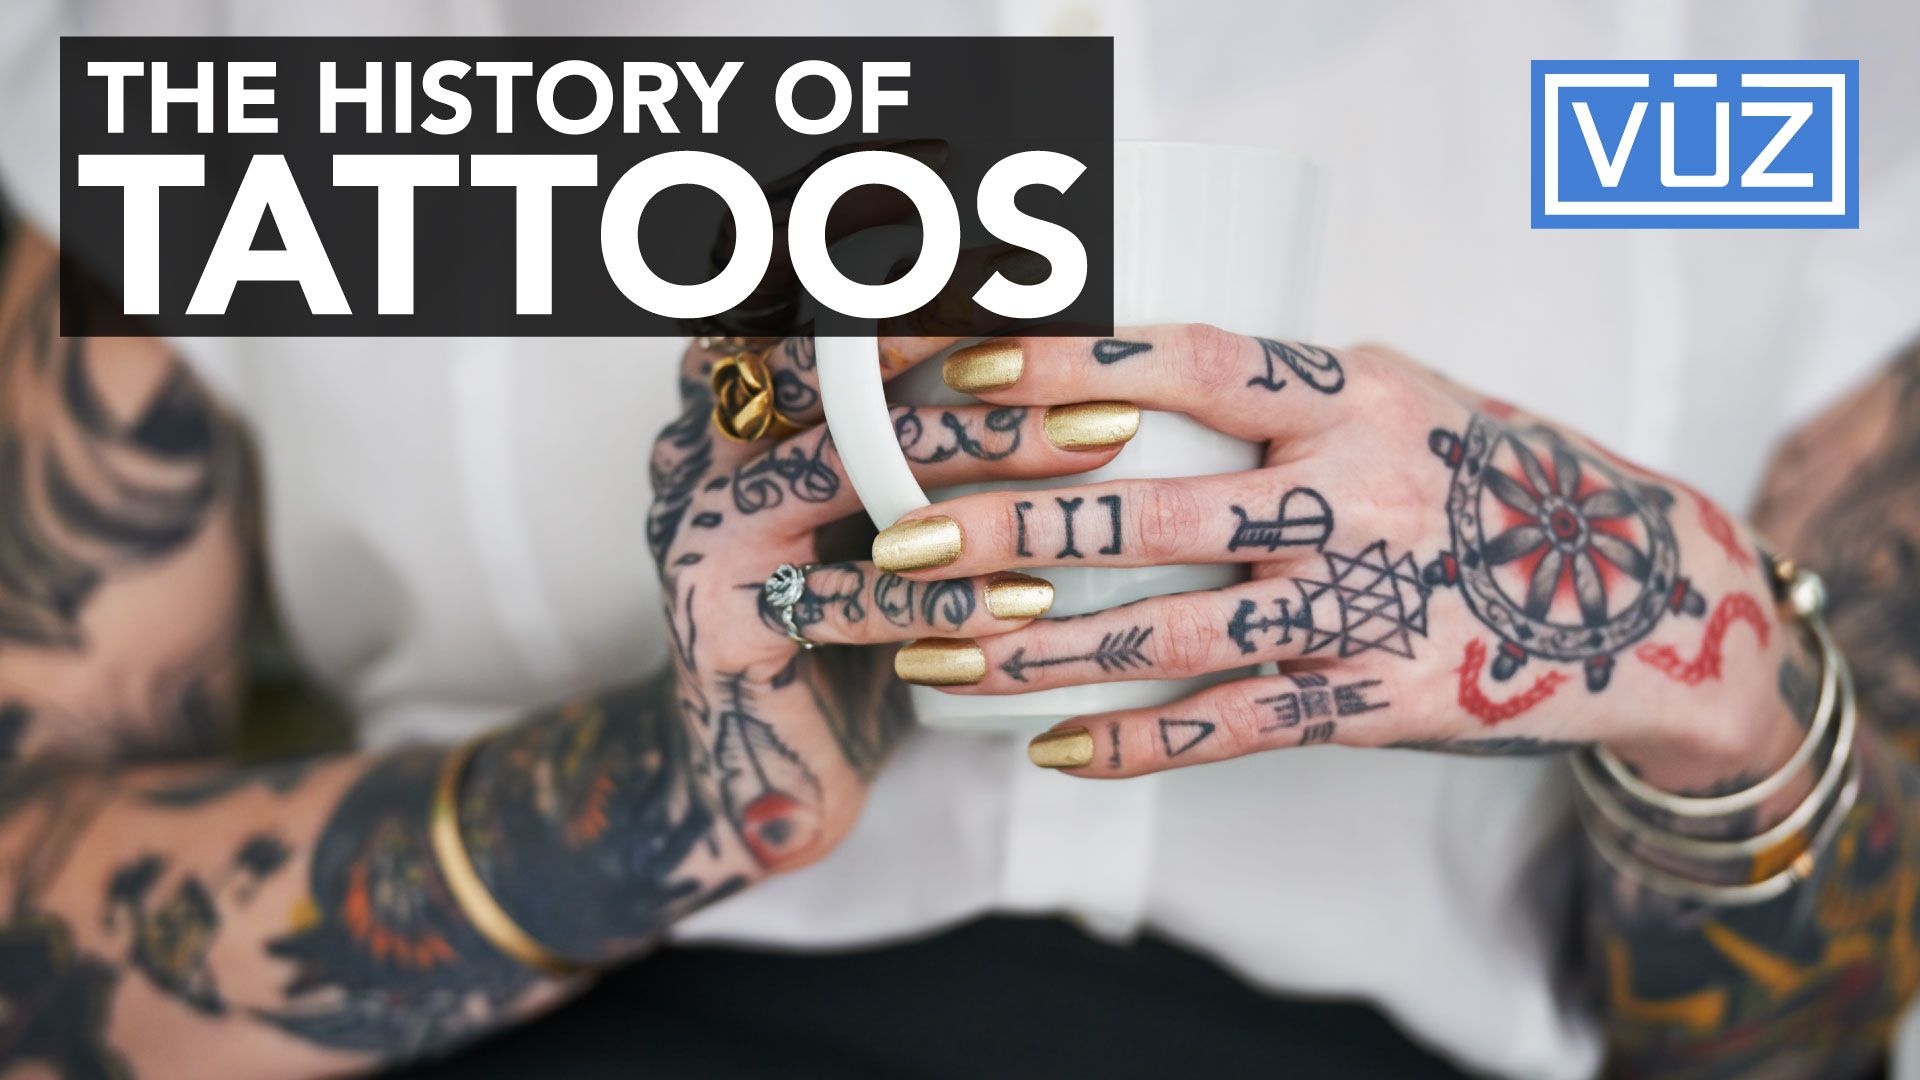 The name for Britain comes from our ancient love of tattoos